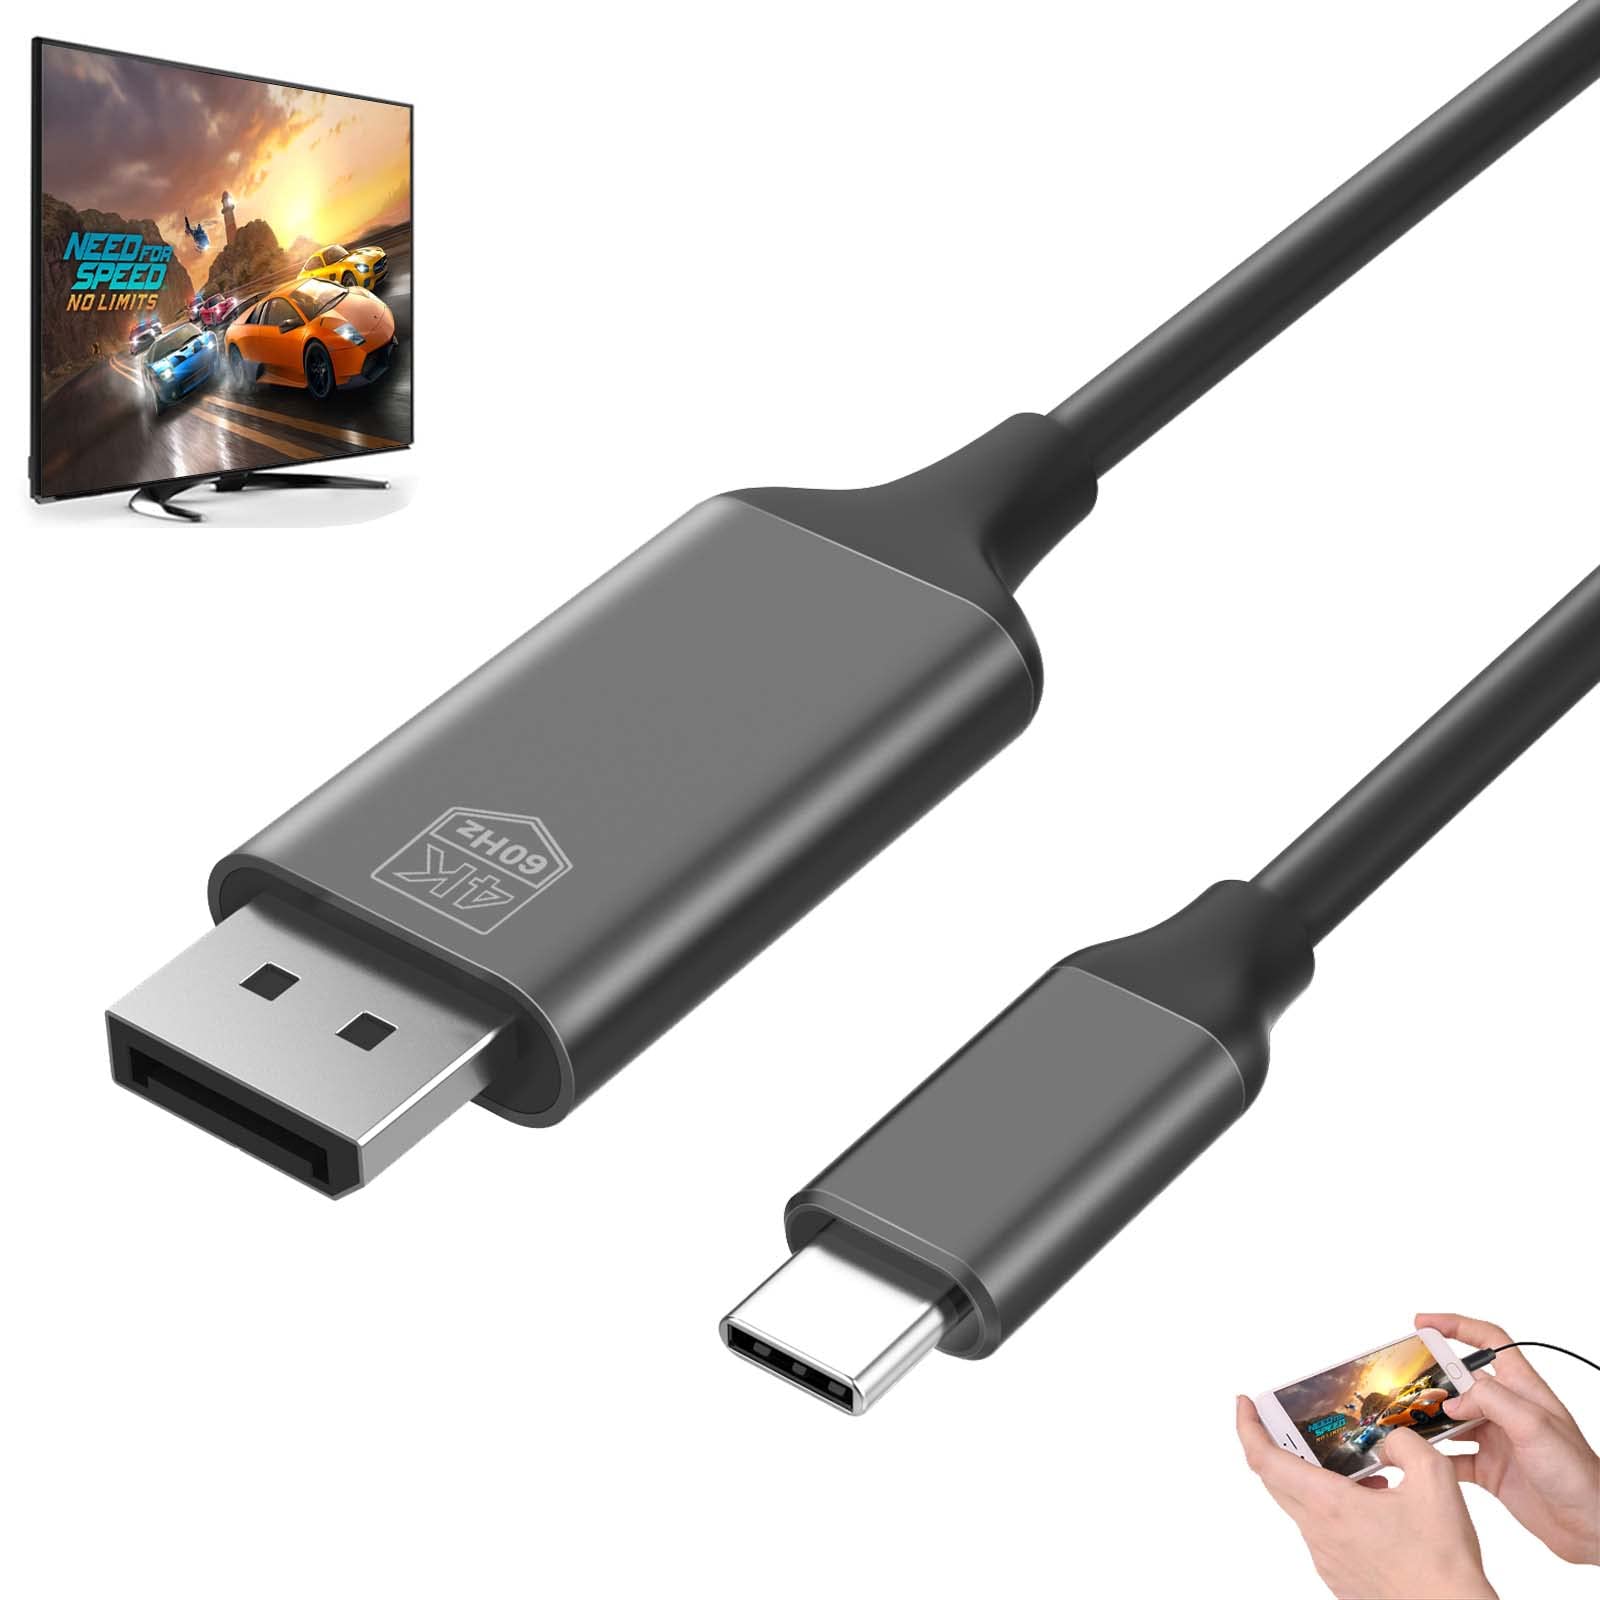 QuadriValue USB-C to DisplayPort Adapter, Thunderbolt 3, 6FT Long, DP 1.4, Compatible with Samsung Galaxy S20, LG G8, OnePlus 7 Pro, HTC U11+ and More